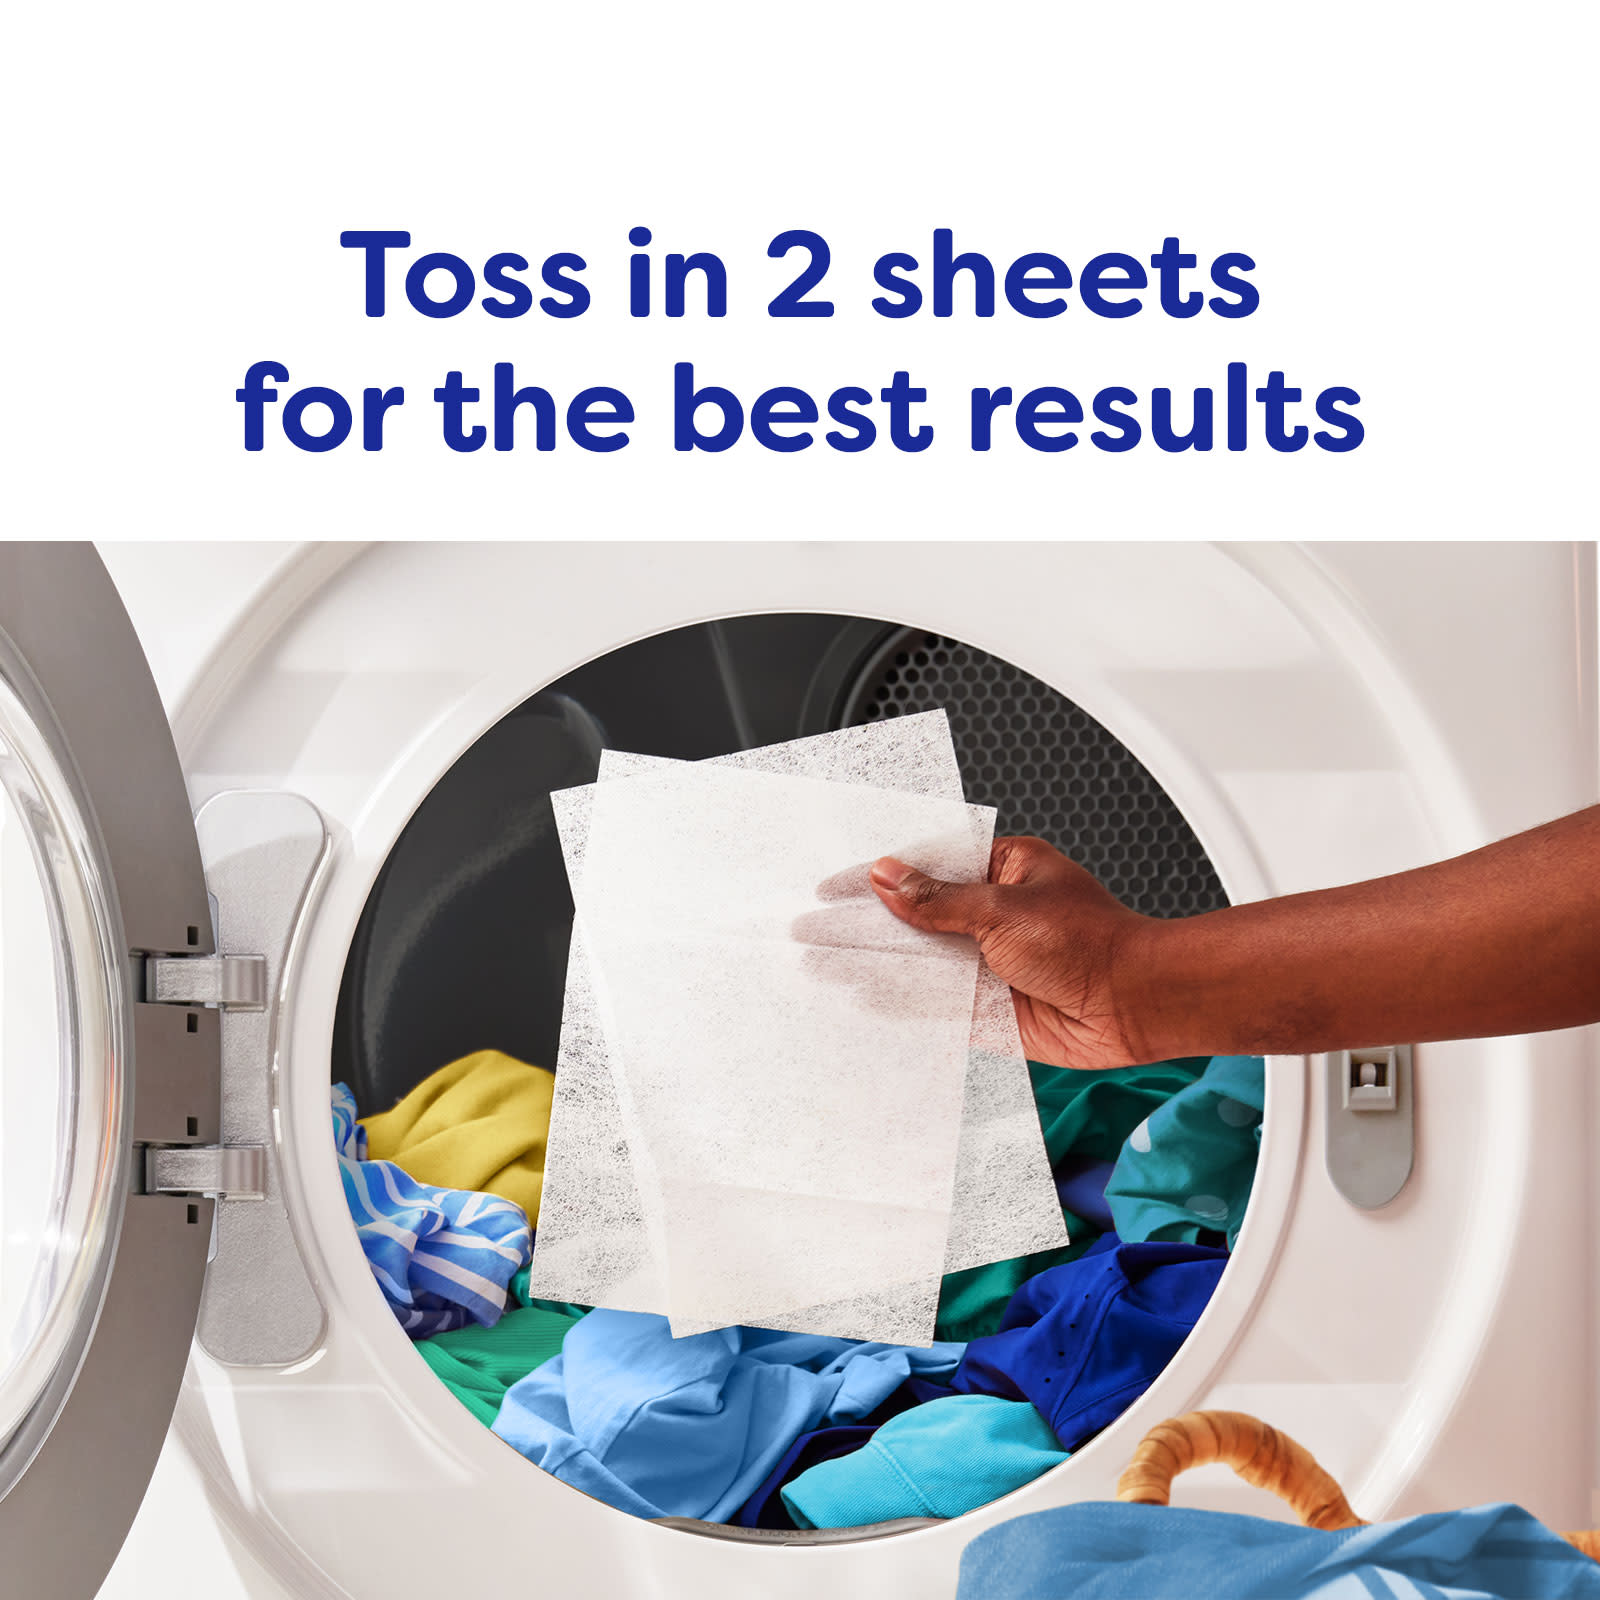 What Dryer Sheets Do to Your Clothes and Dryer